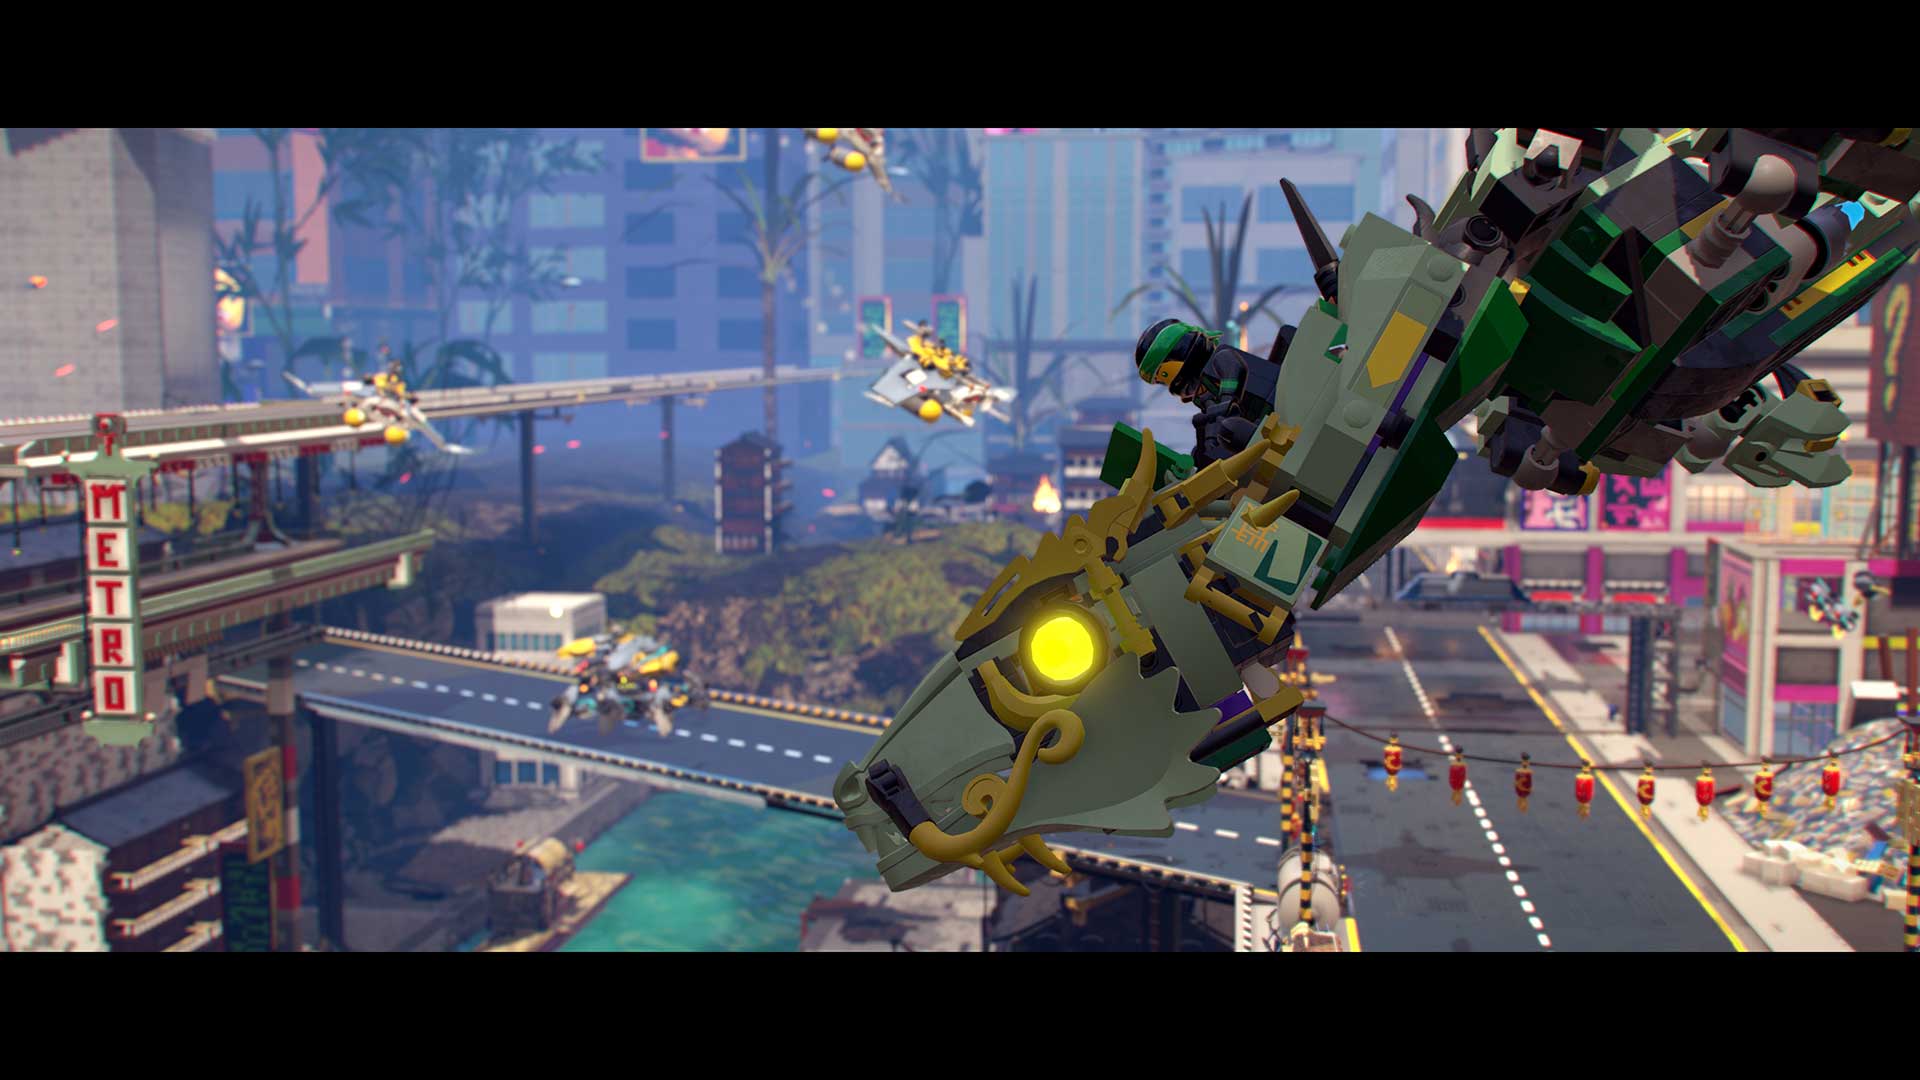 REVIEW : LEGO NINJAGO Movie Video Game (PS4/ PS4 Pro)